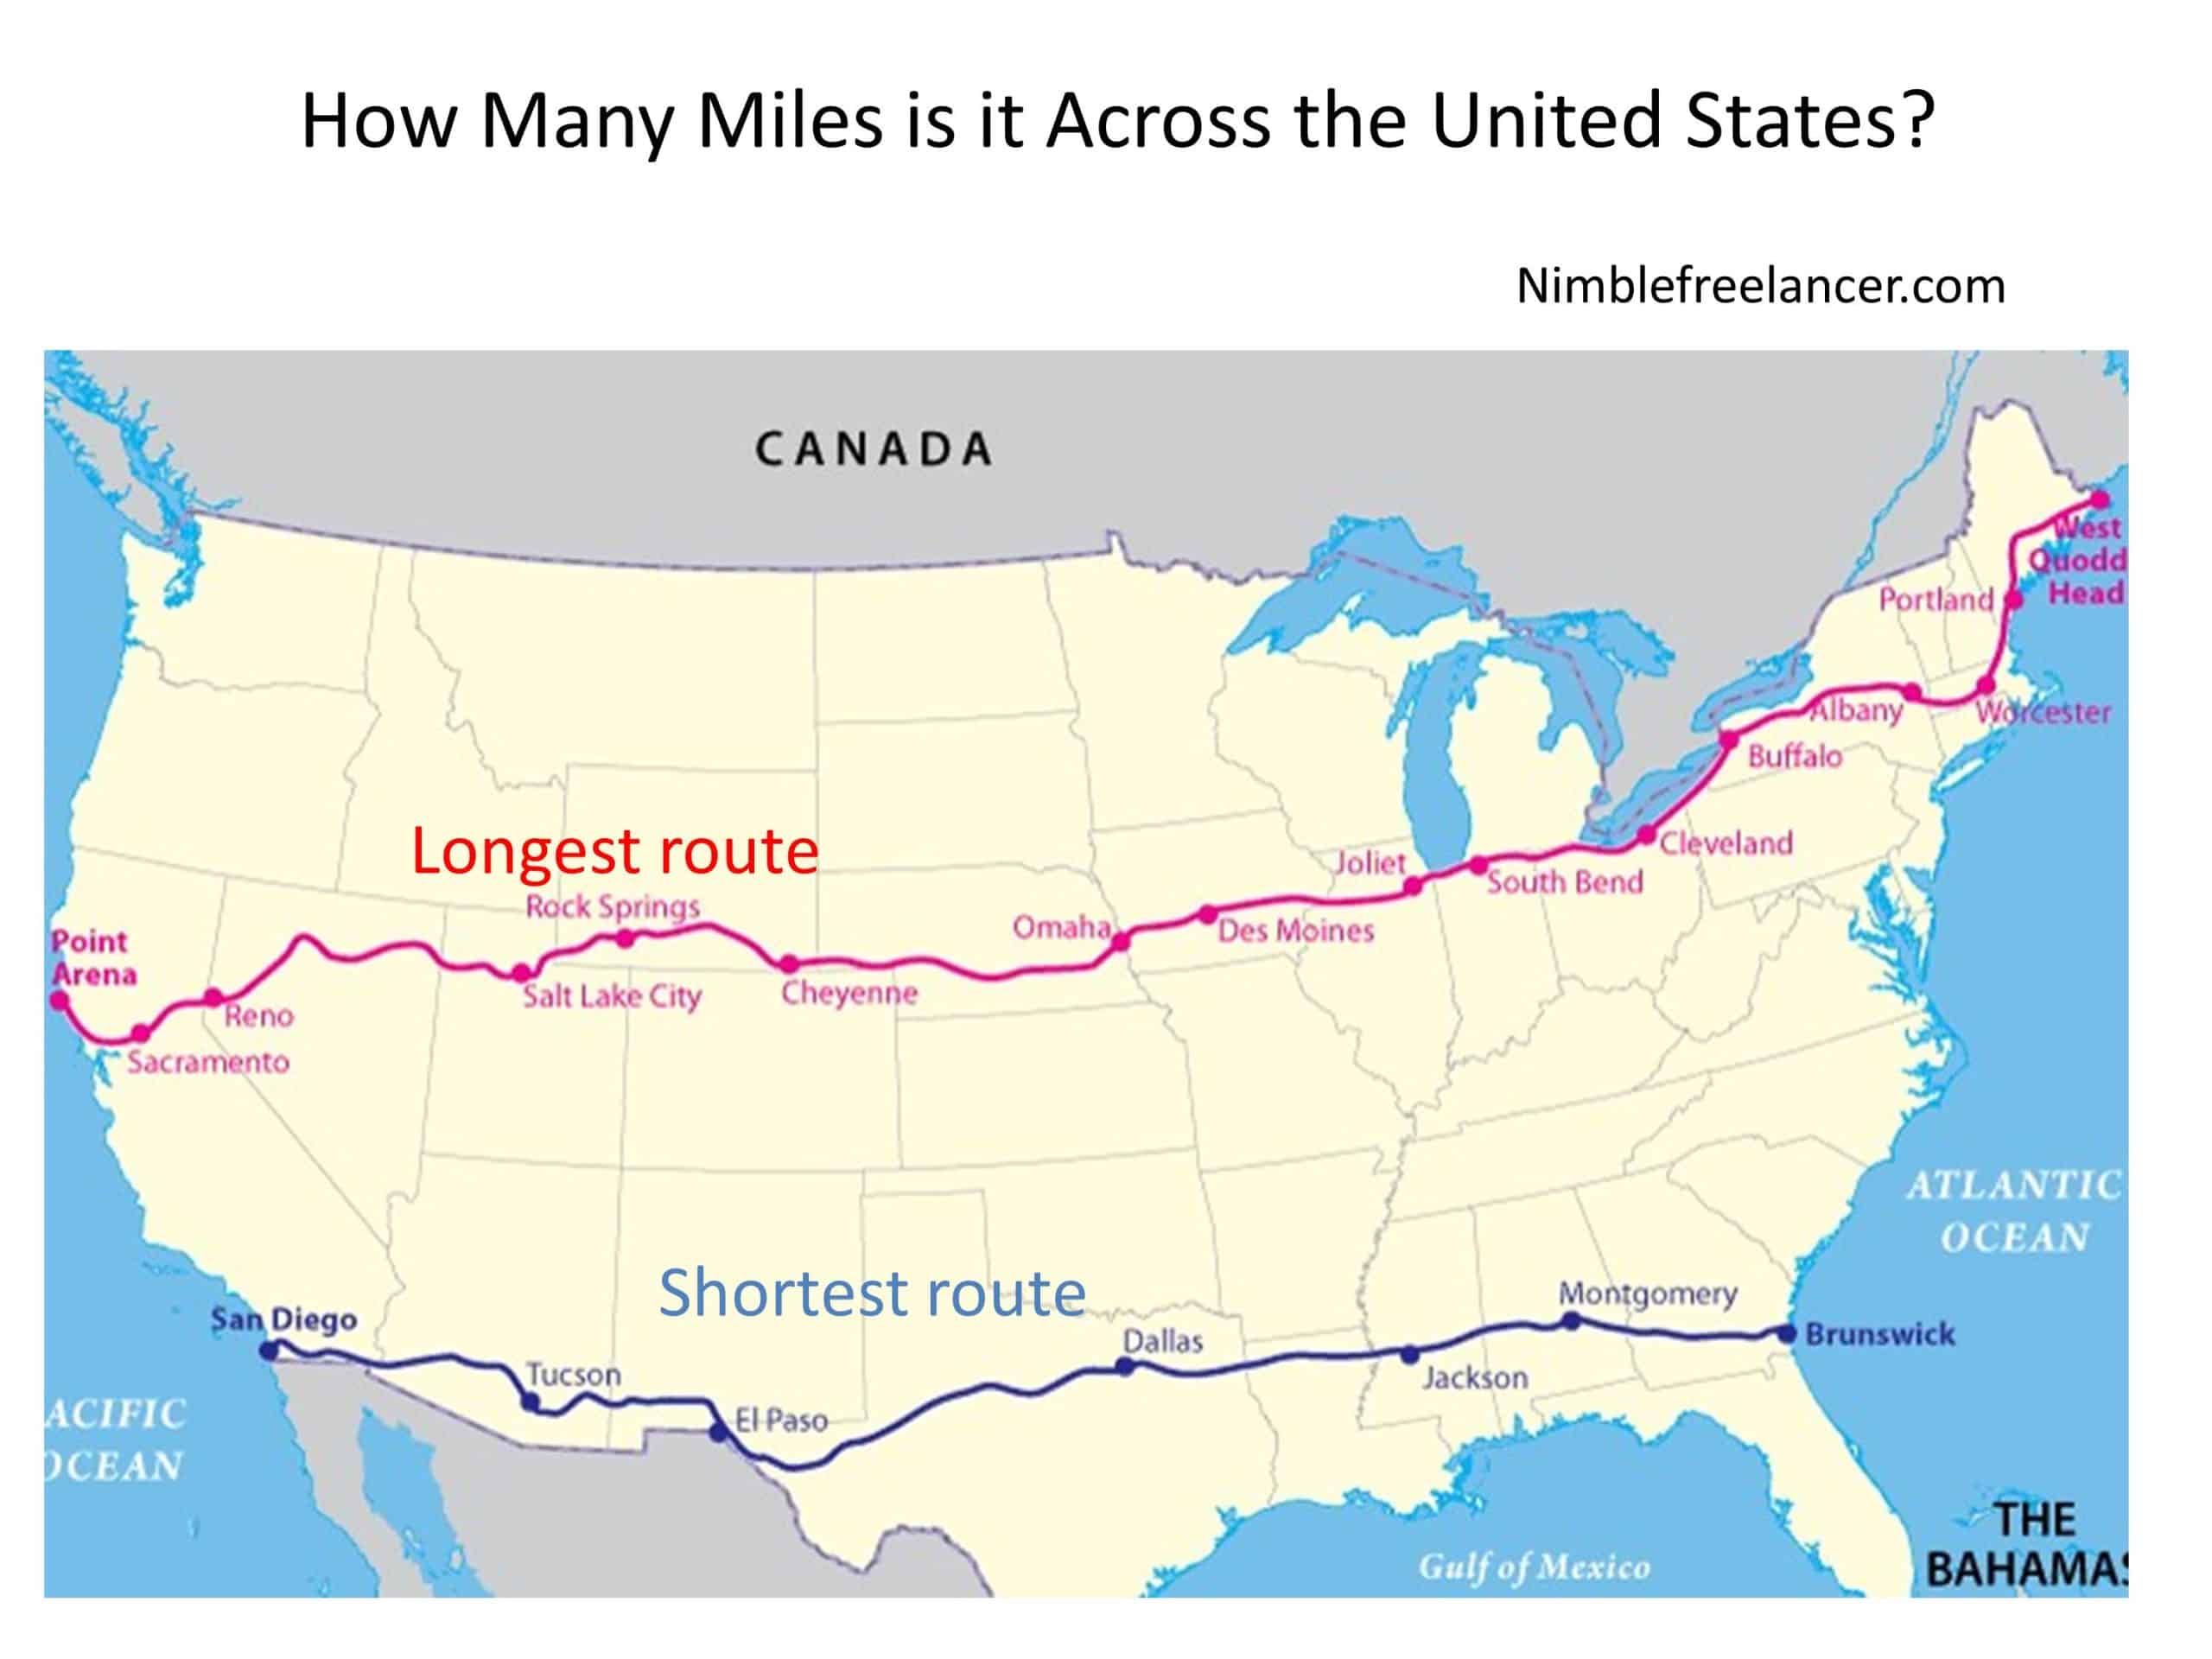 How Many Miles is it Across the United States